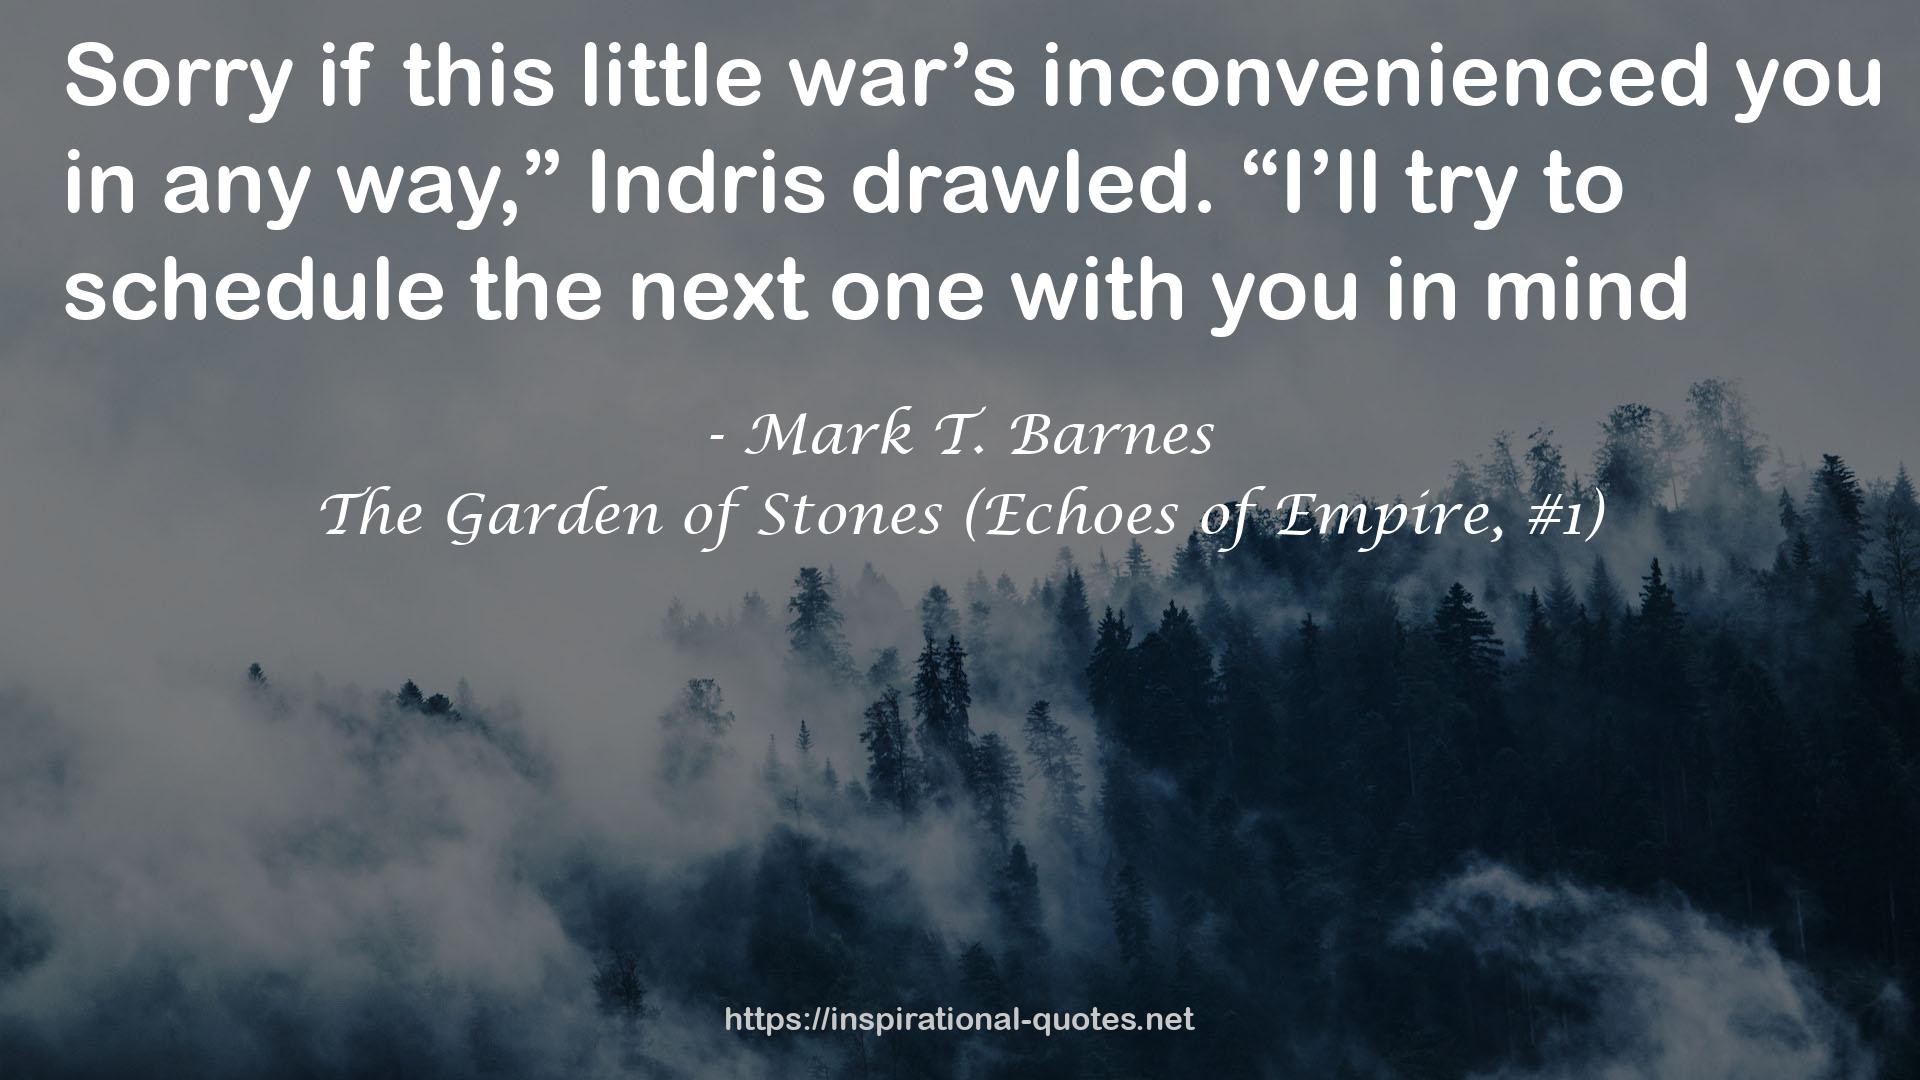 The Garden of Stones (Echoes of Empire, #1) QUOTES